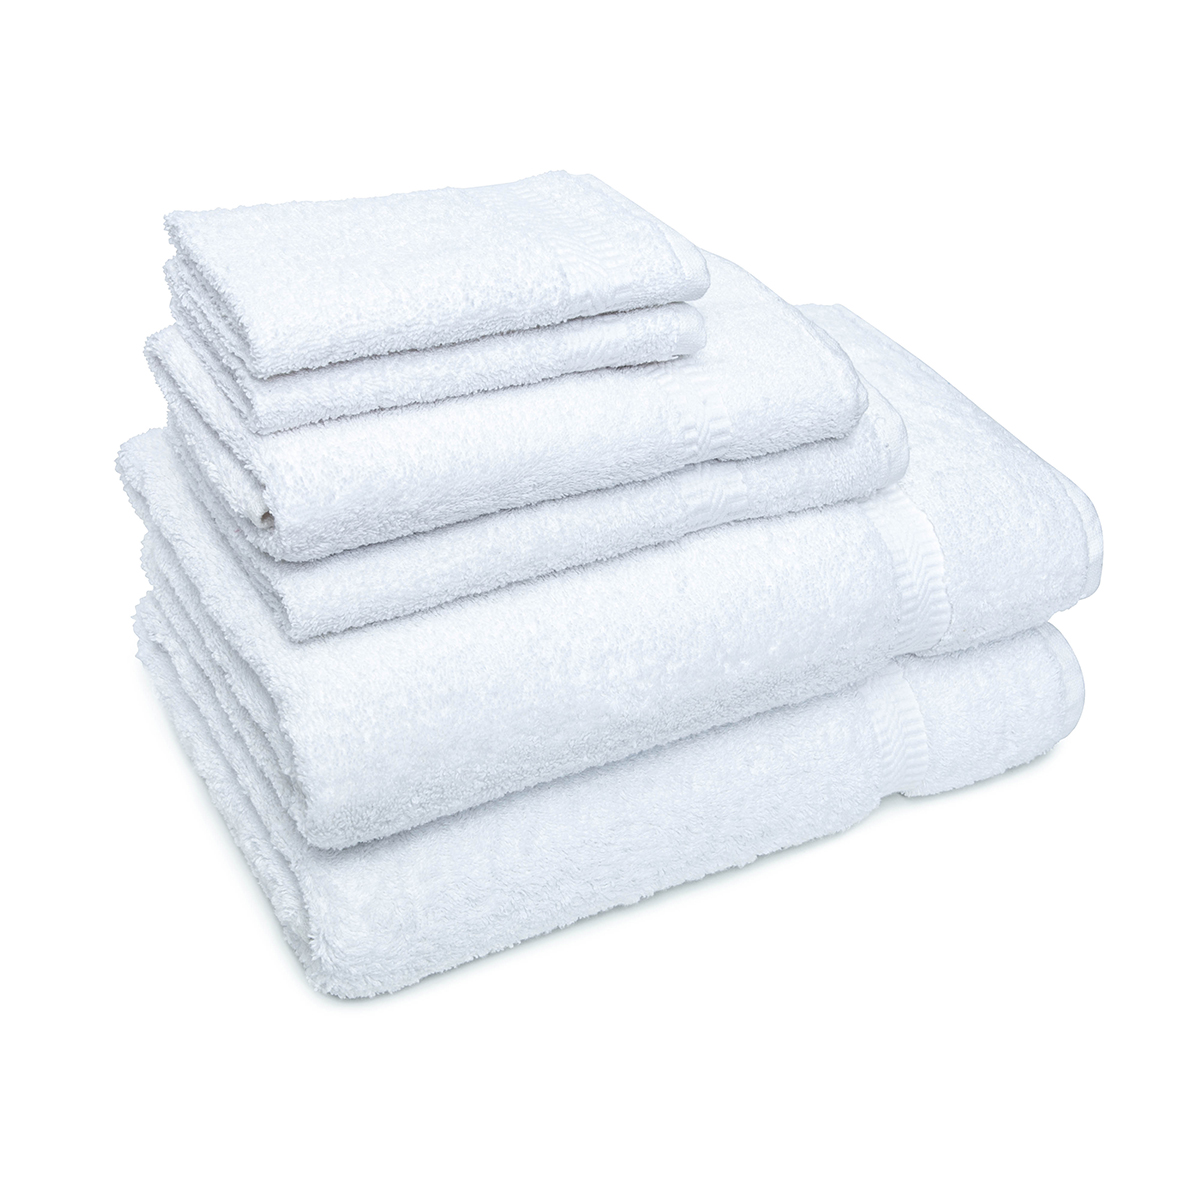 What are the features of ADI's plush hotel towels, specifically the white guestroom adi towels?